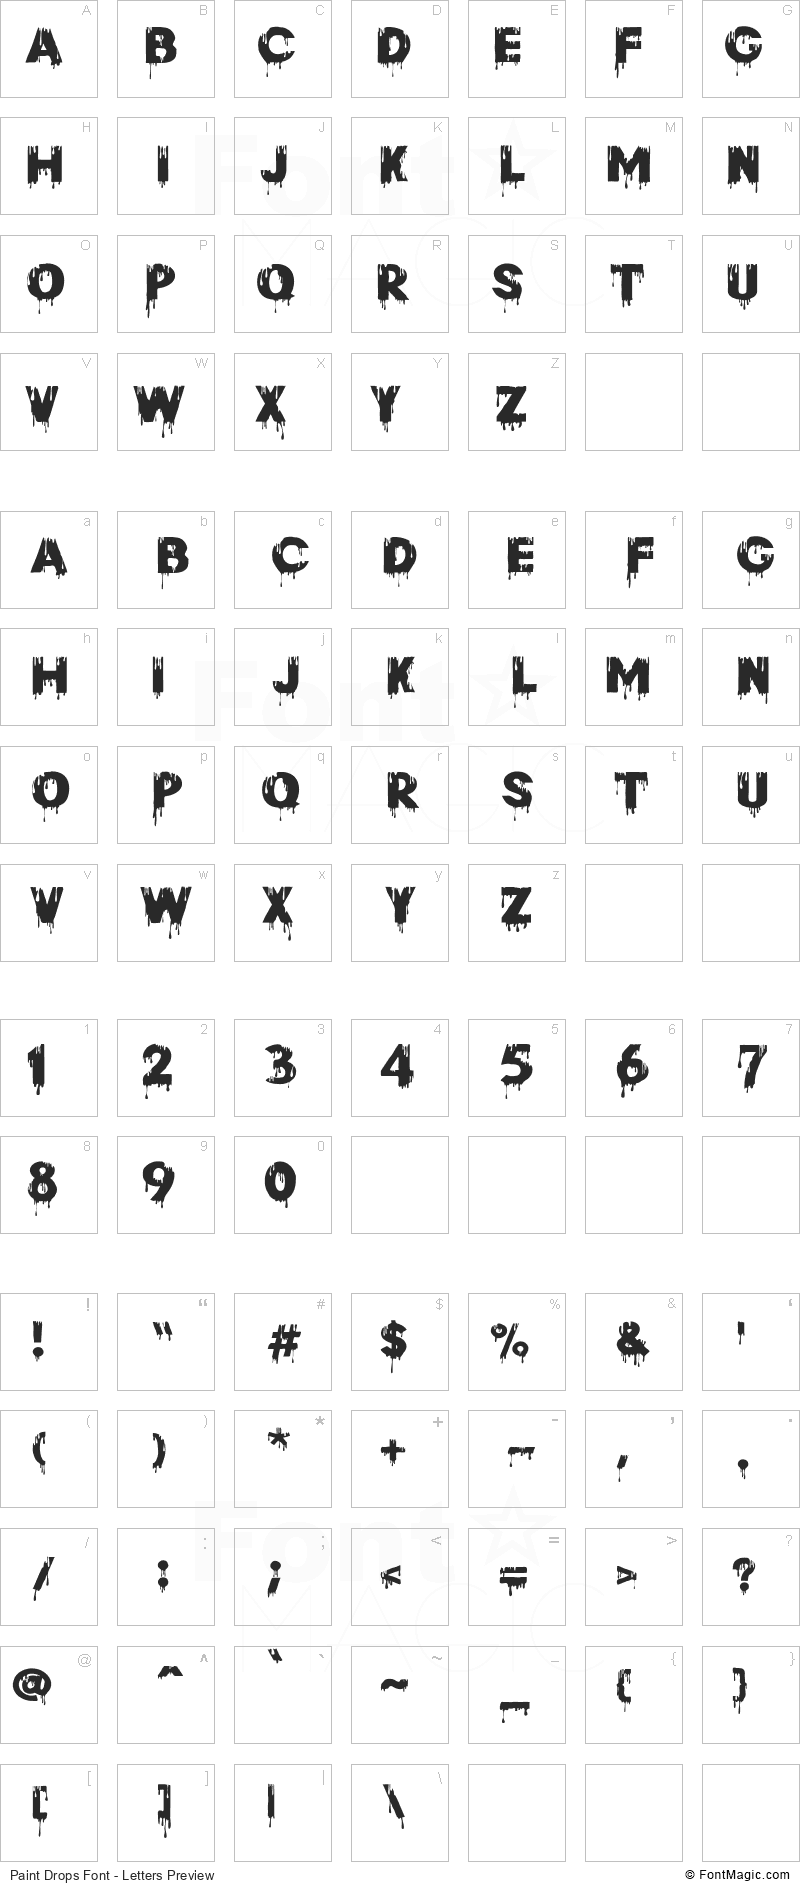 Paint Drops Font - All Latters Preview Chart